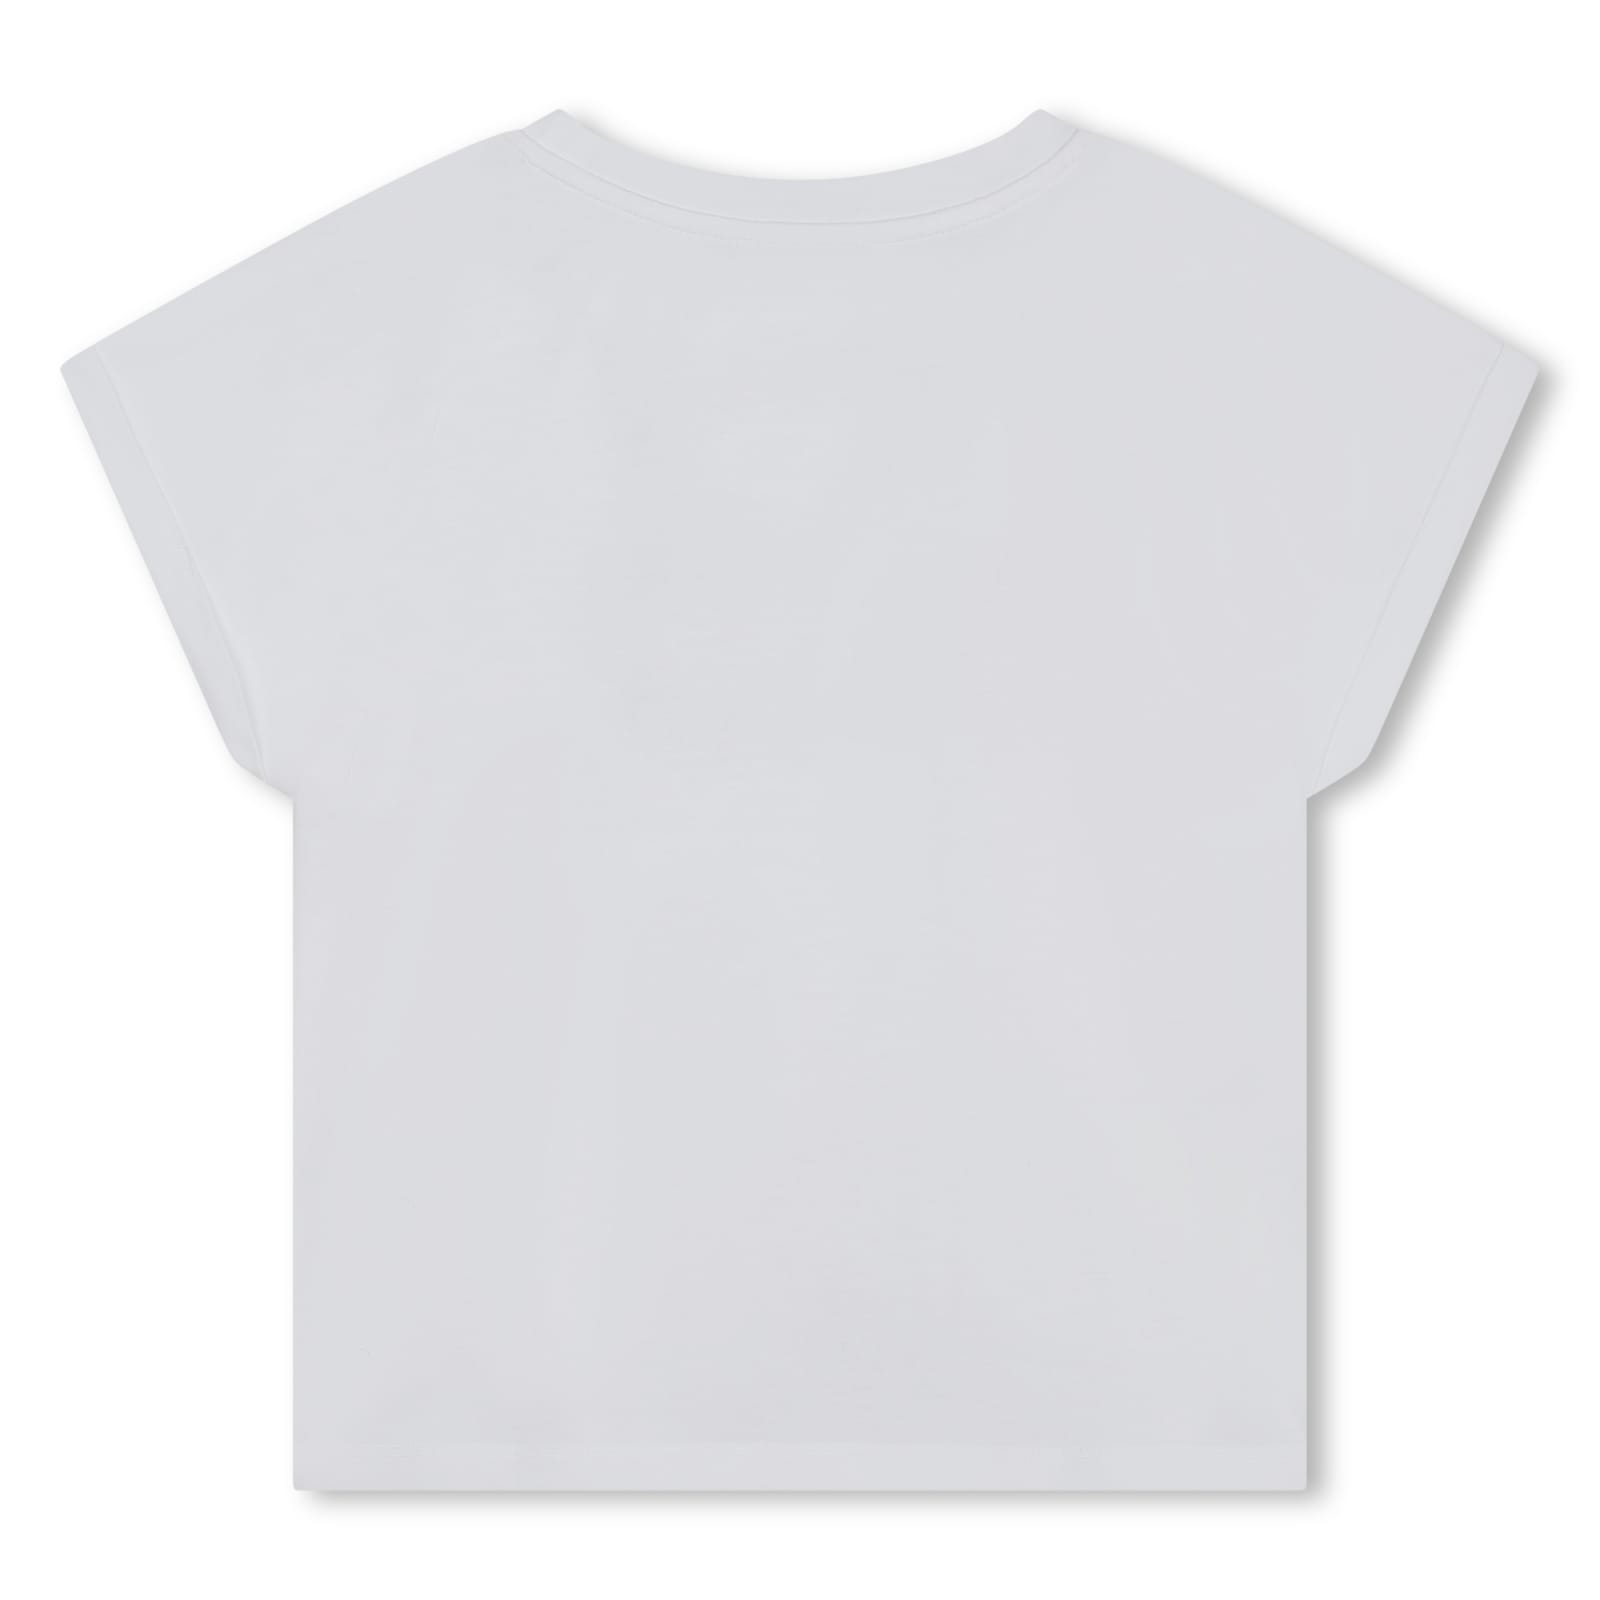 Shop Dkny T-shirt With Print In White